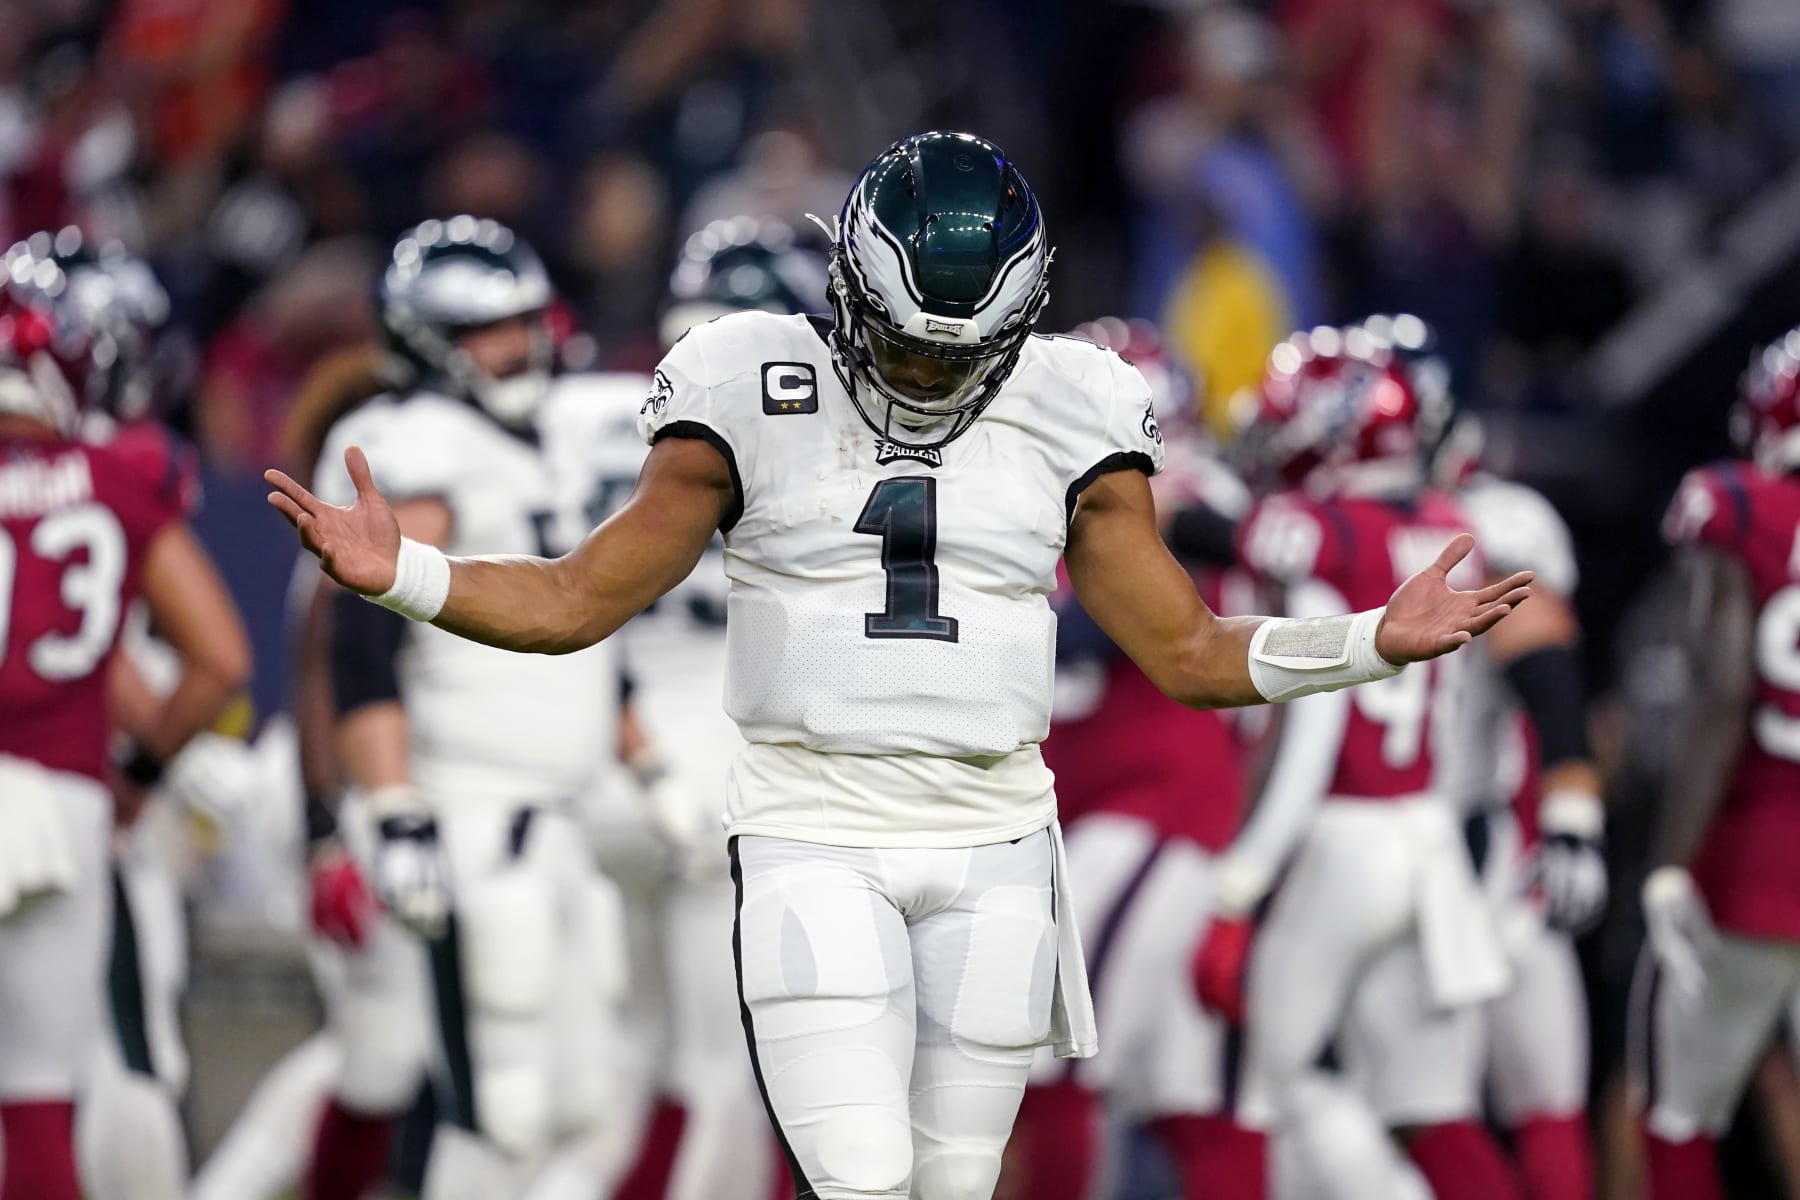 NFL Power Rankings Week 10: Eagles on top, Chiefs, Pat Mahomes, move up  after beating Titans; Seahawks, Jets rise into top 10